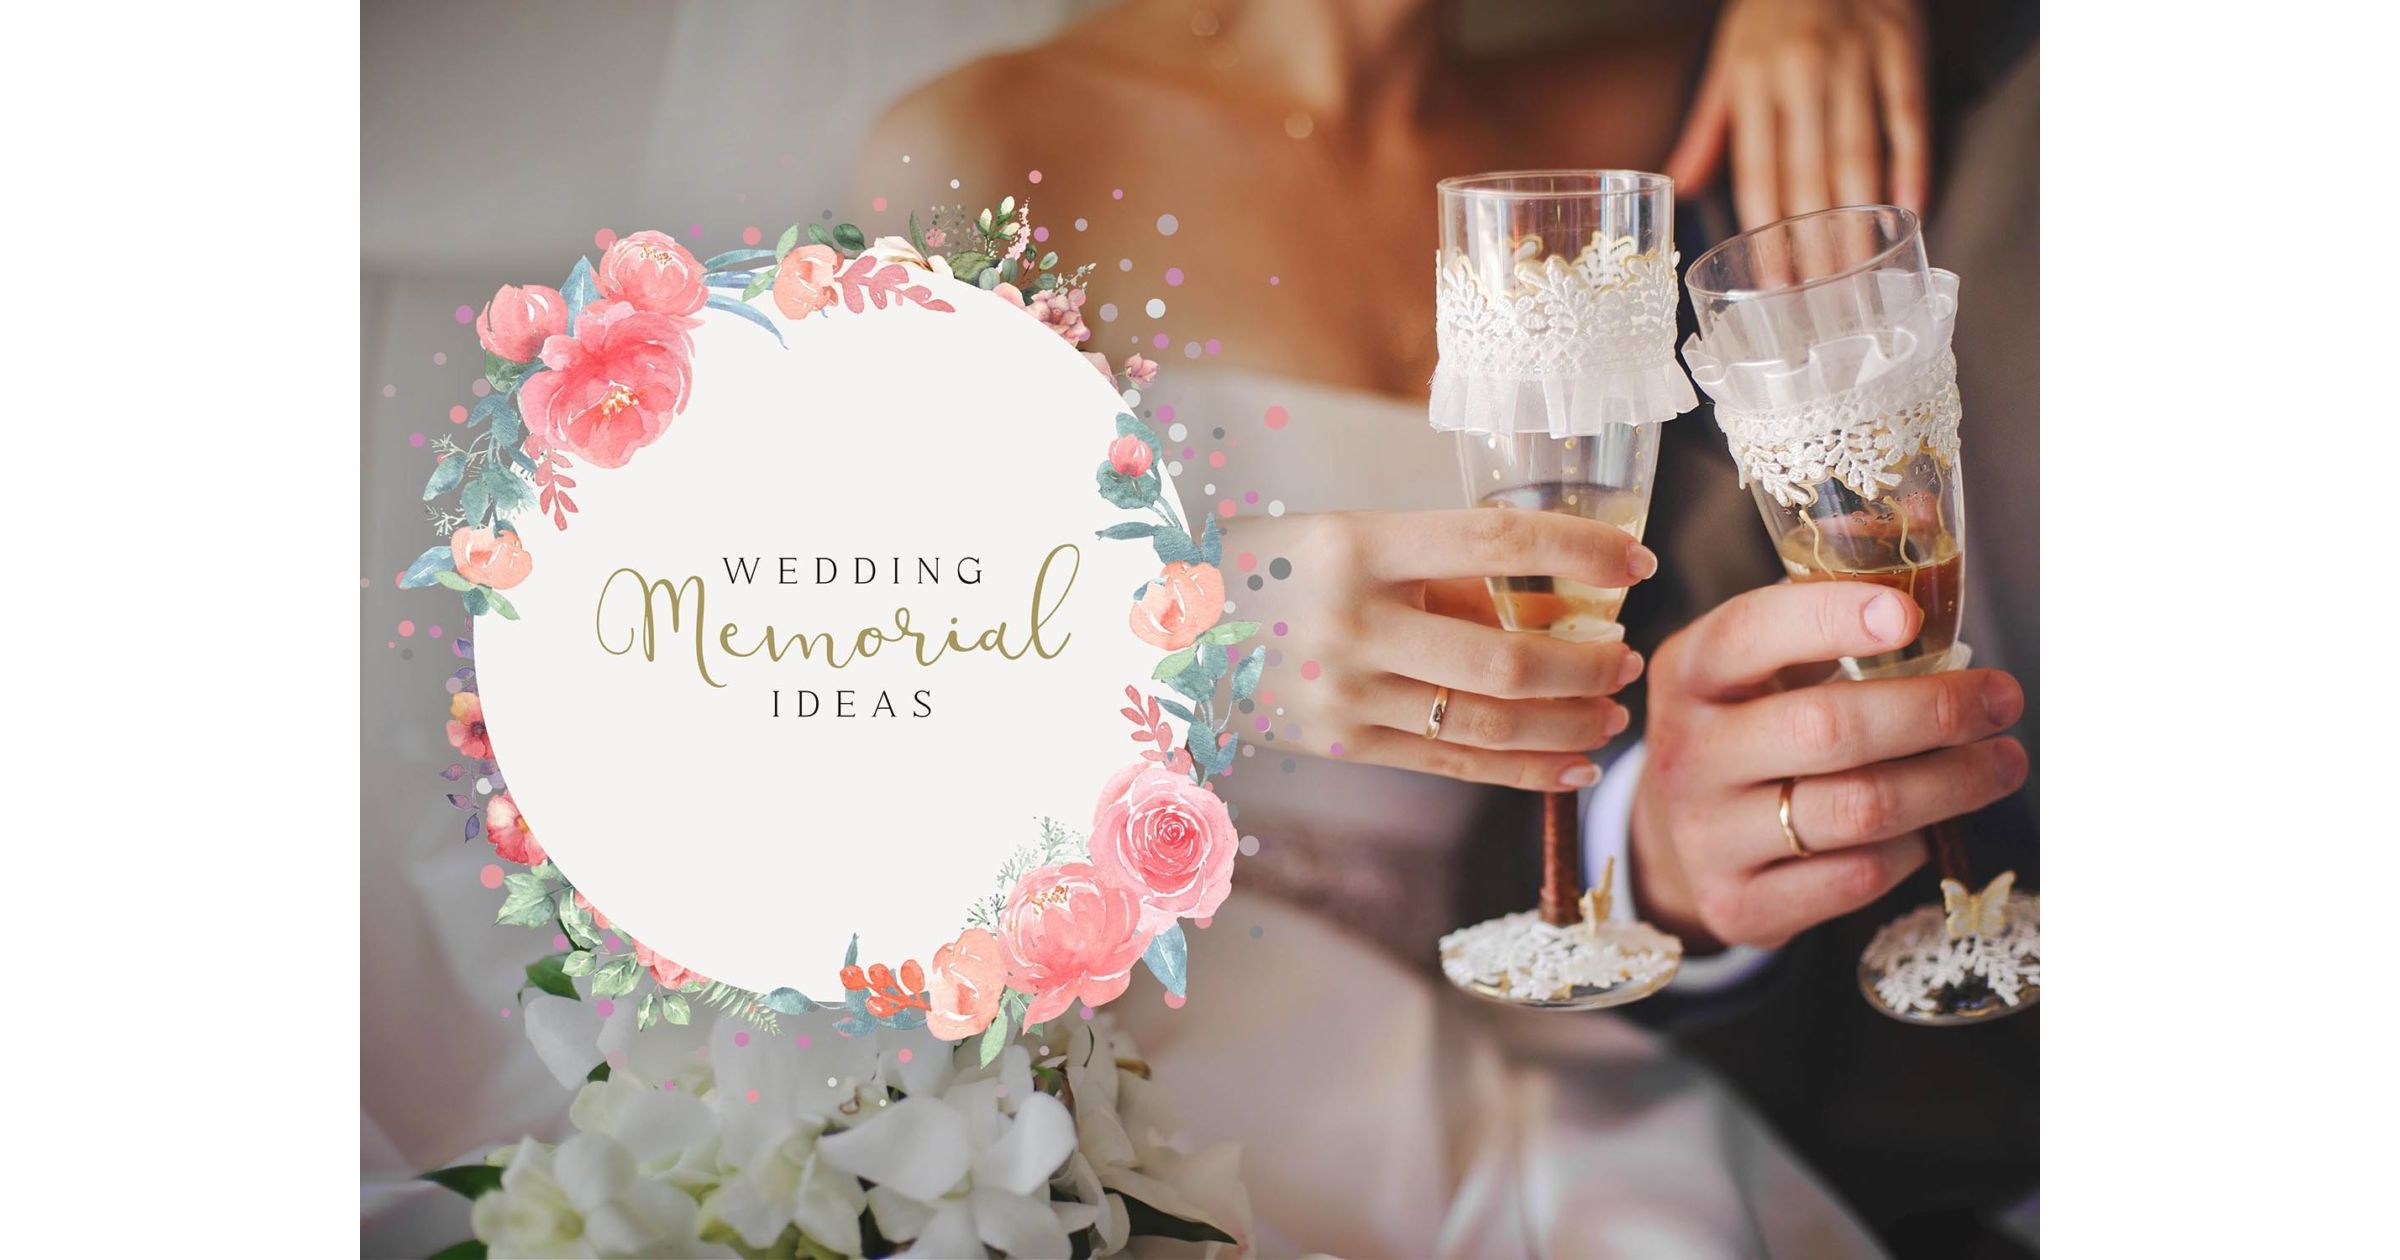 Ways to Remember Loved Ones at Your Wedding